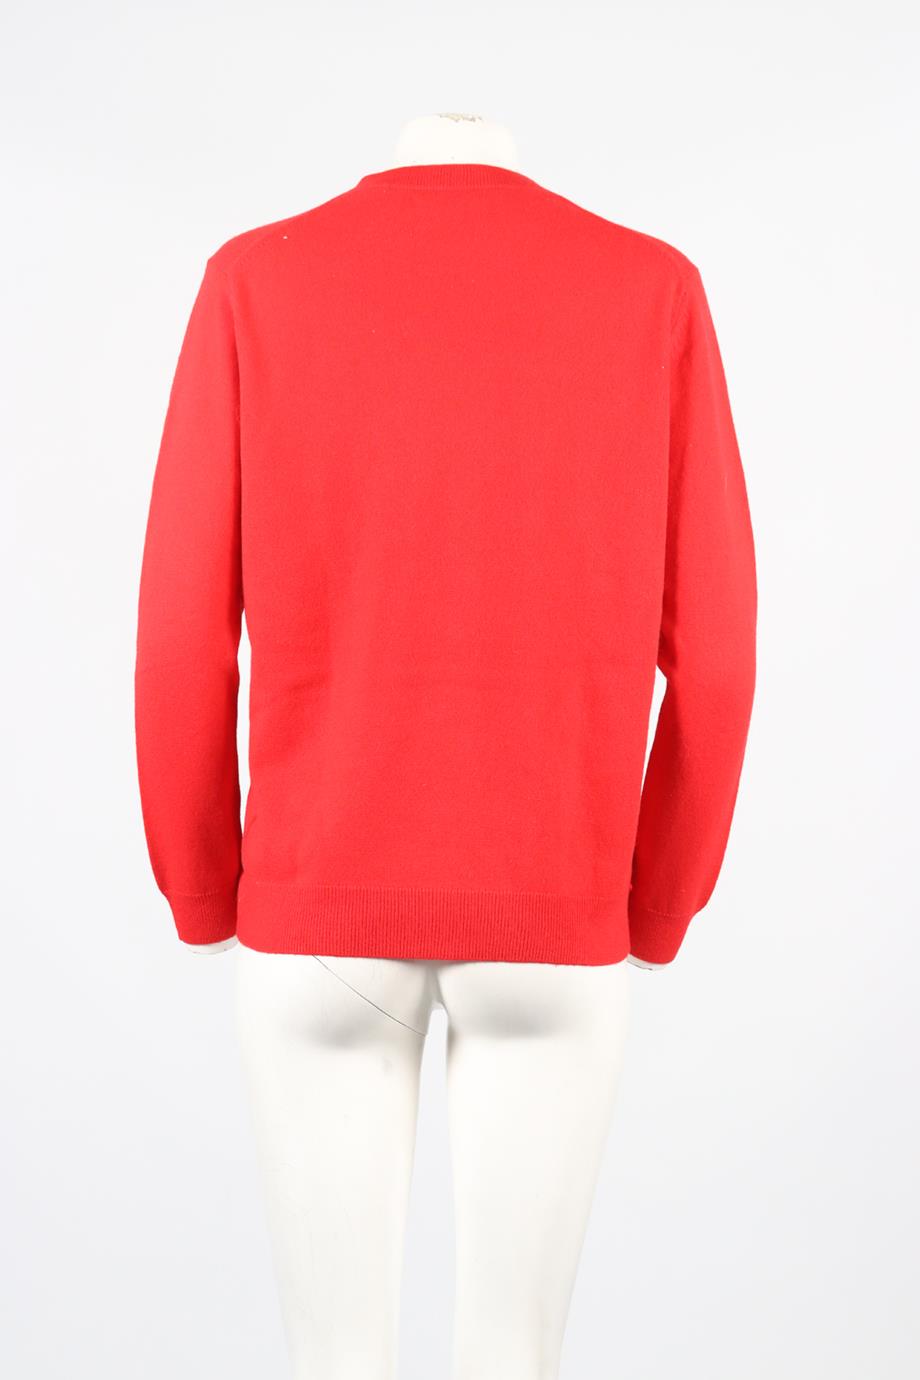 CHINTI & PARKER CASHMERE BLEND SWEATER